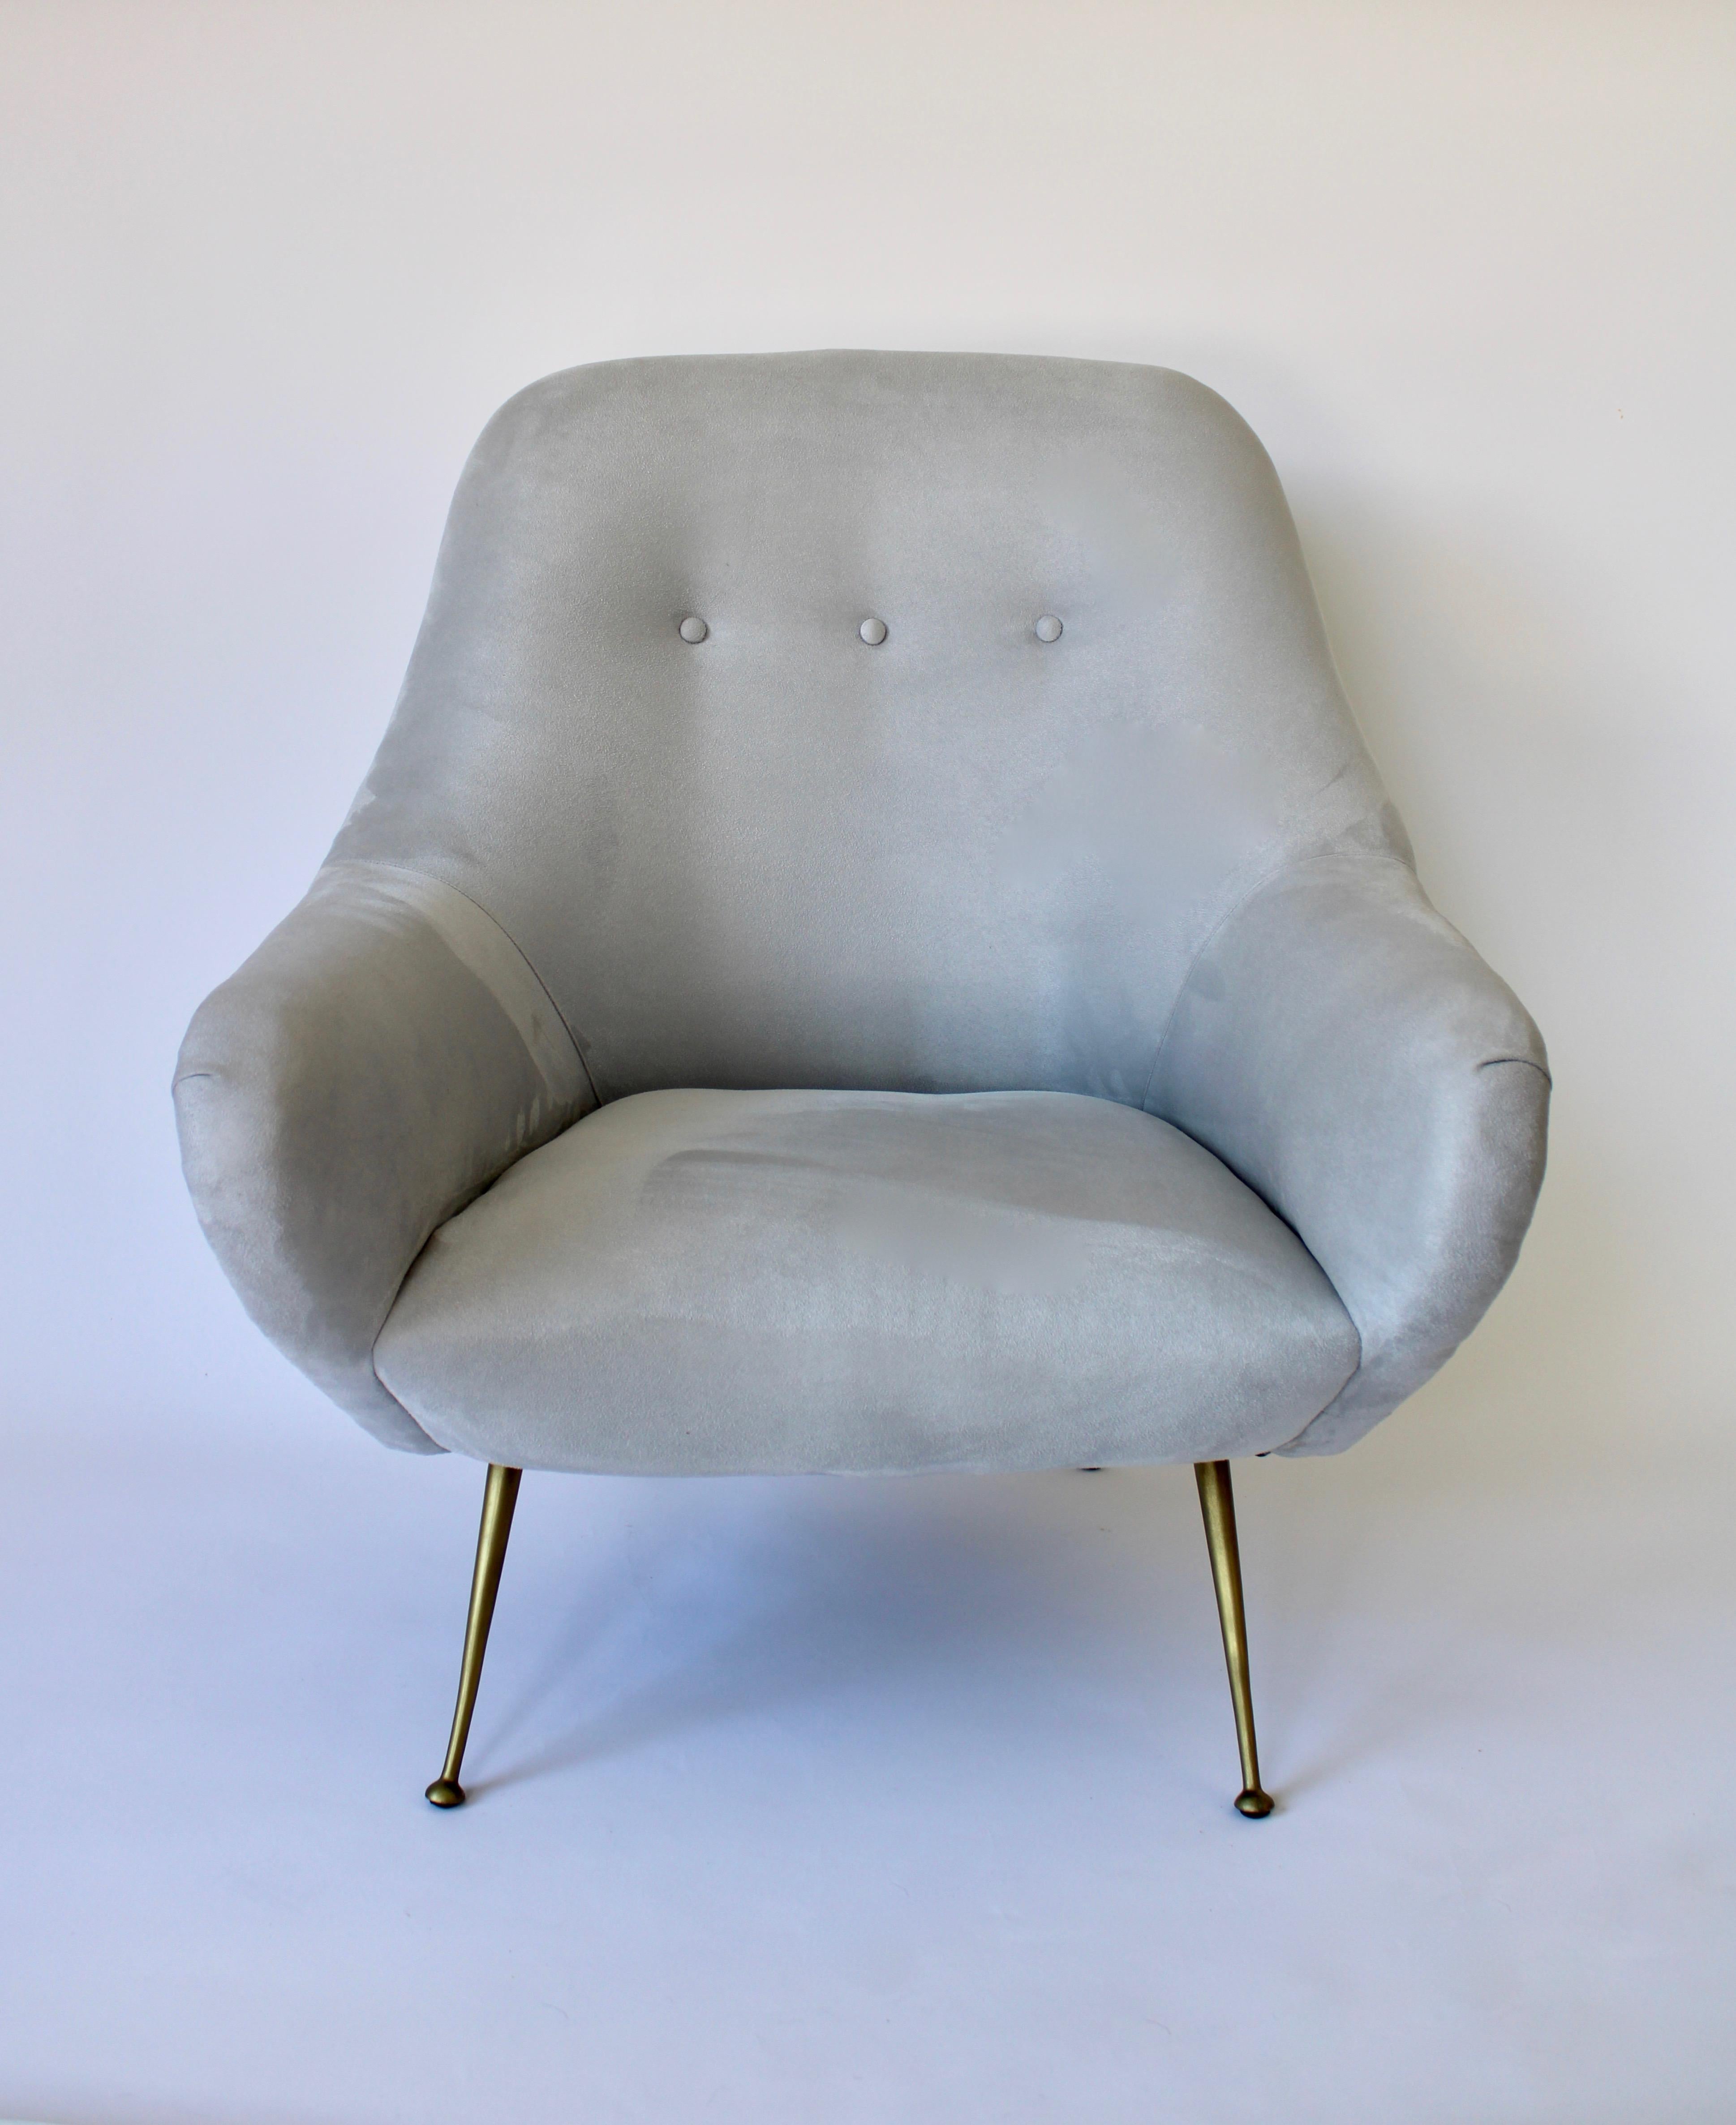 Pair of Italian lounge chairs in the style of Gigi Radice and some characteristics of Marco Zanuso.
The chairs have been reupholstered in light gray ultra-suede on the interior with a tufted back.
The exterior of the chairs are reupholstered in a